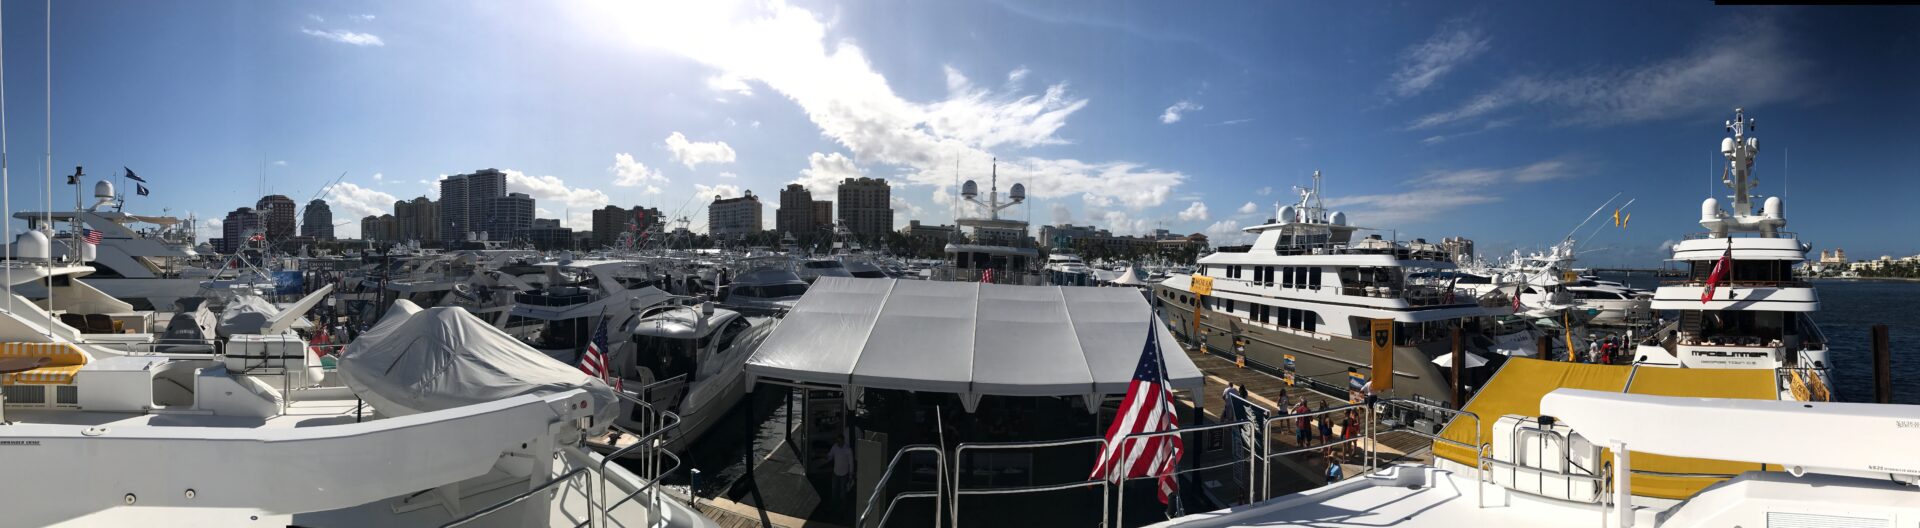 Boat Show Pano